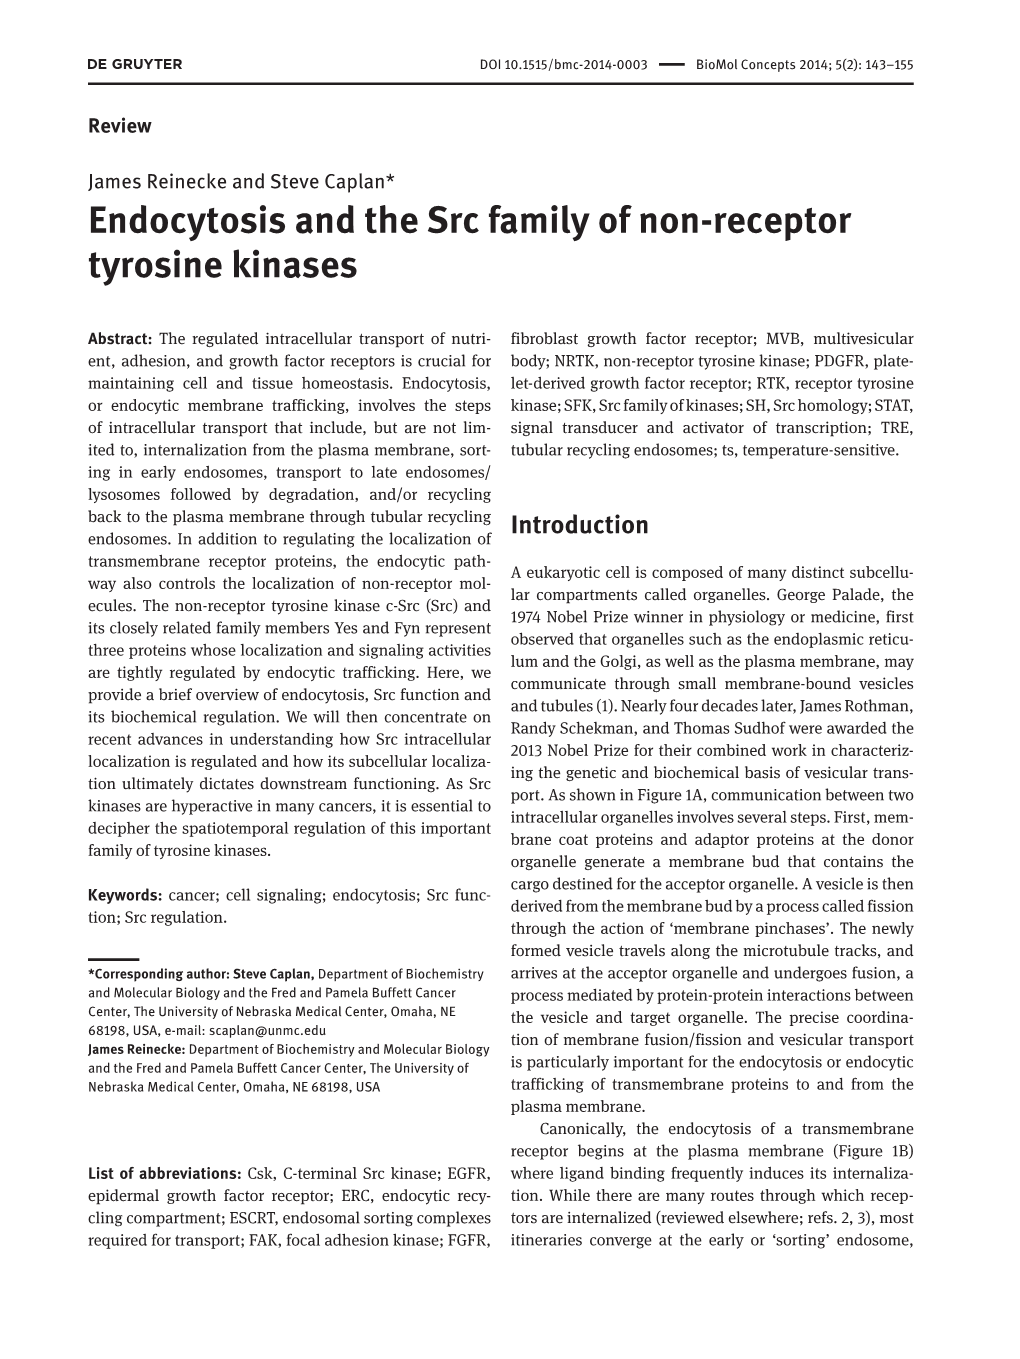 Endocytosis and the Src Family of Non-Receptor Tyrosine Kinases